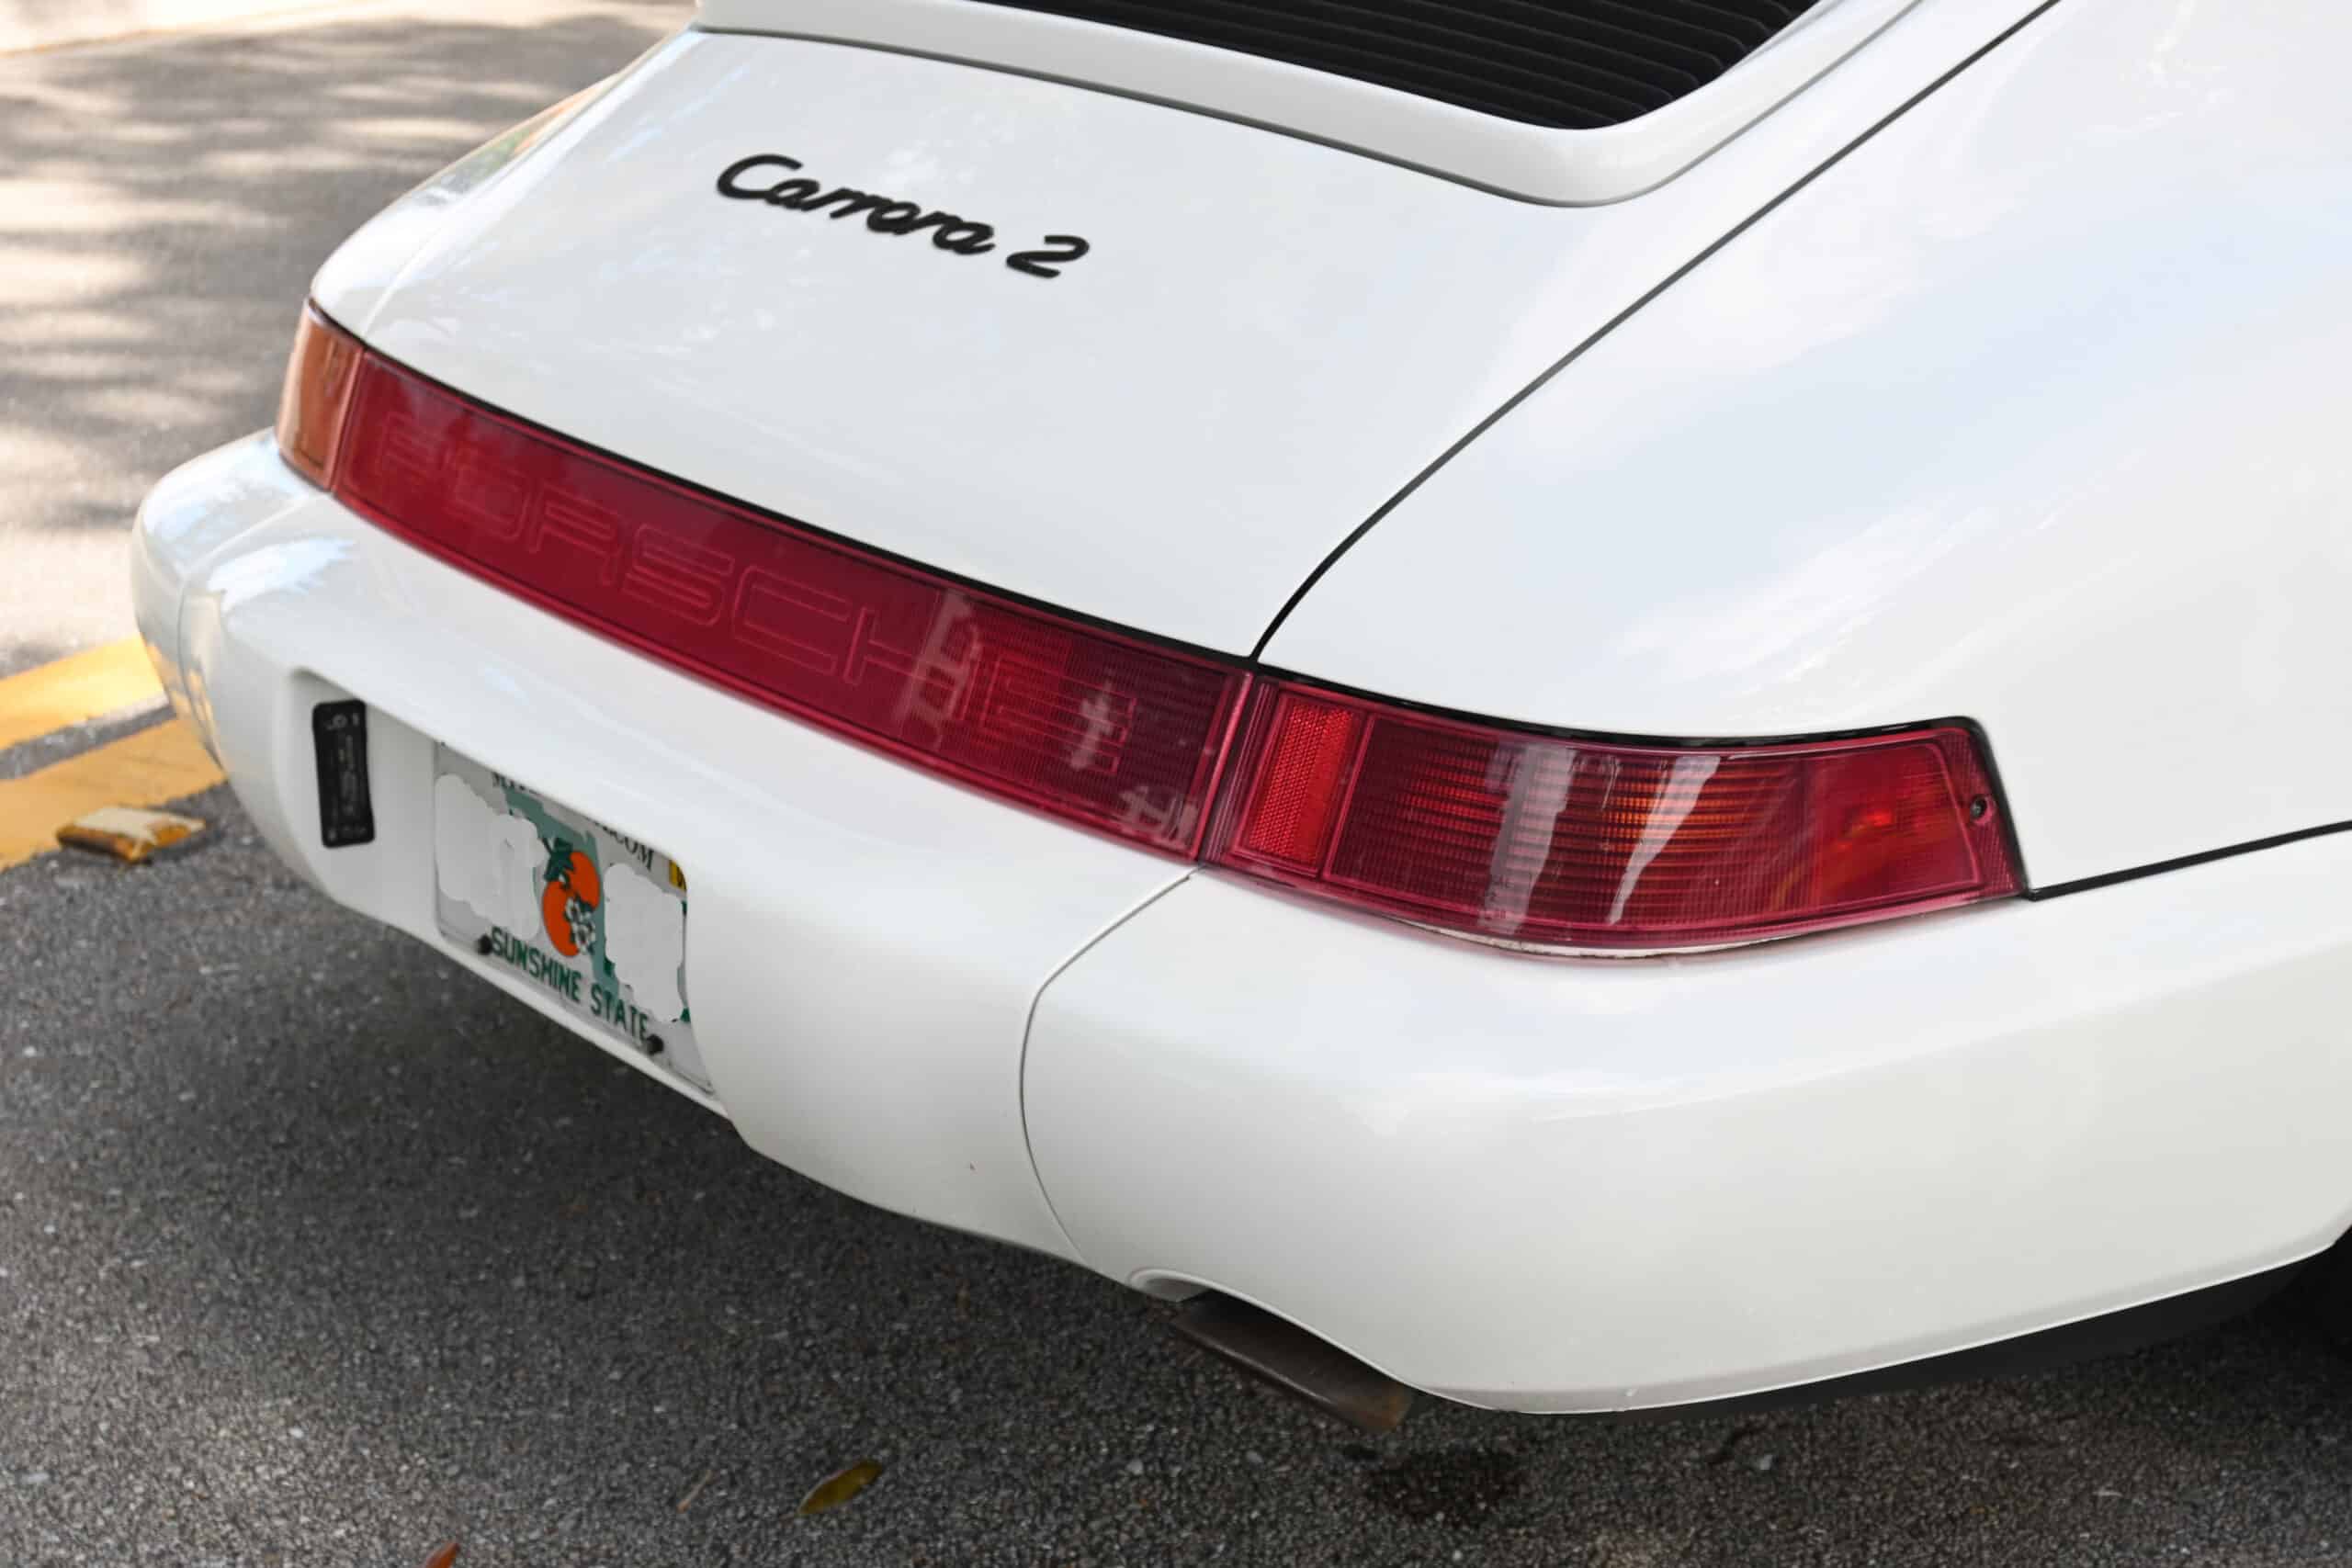 1993 964 Carrera 2.  Last year C2 One of 600, mostly original paint, documented service history